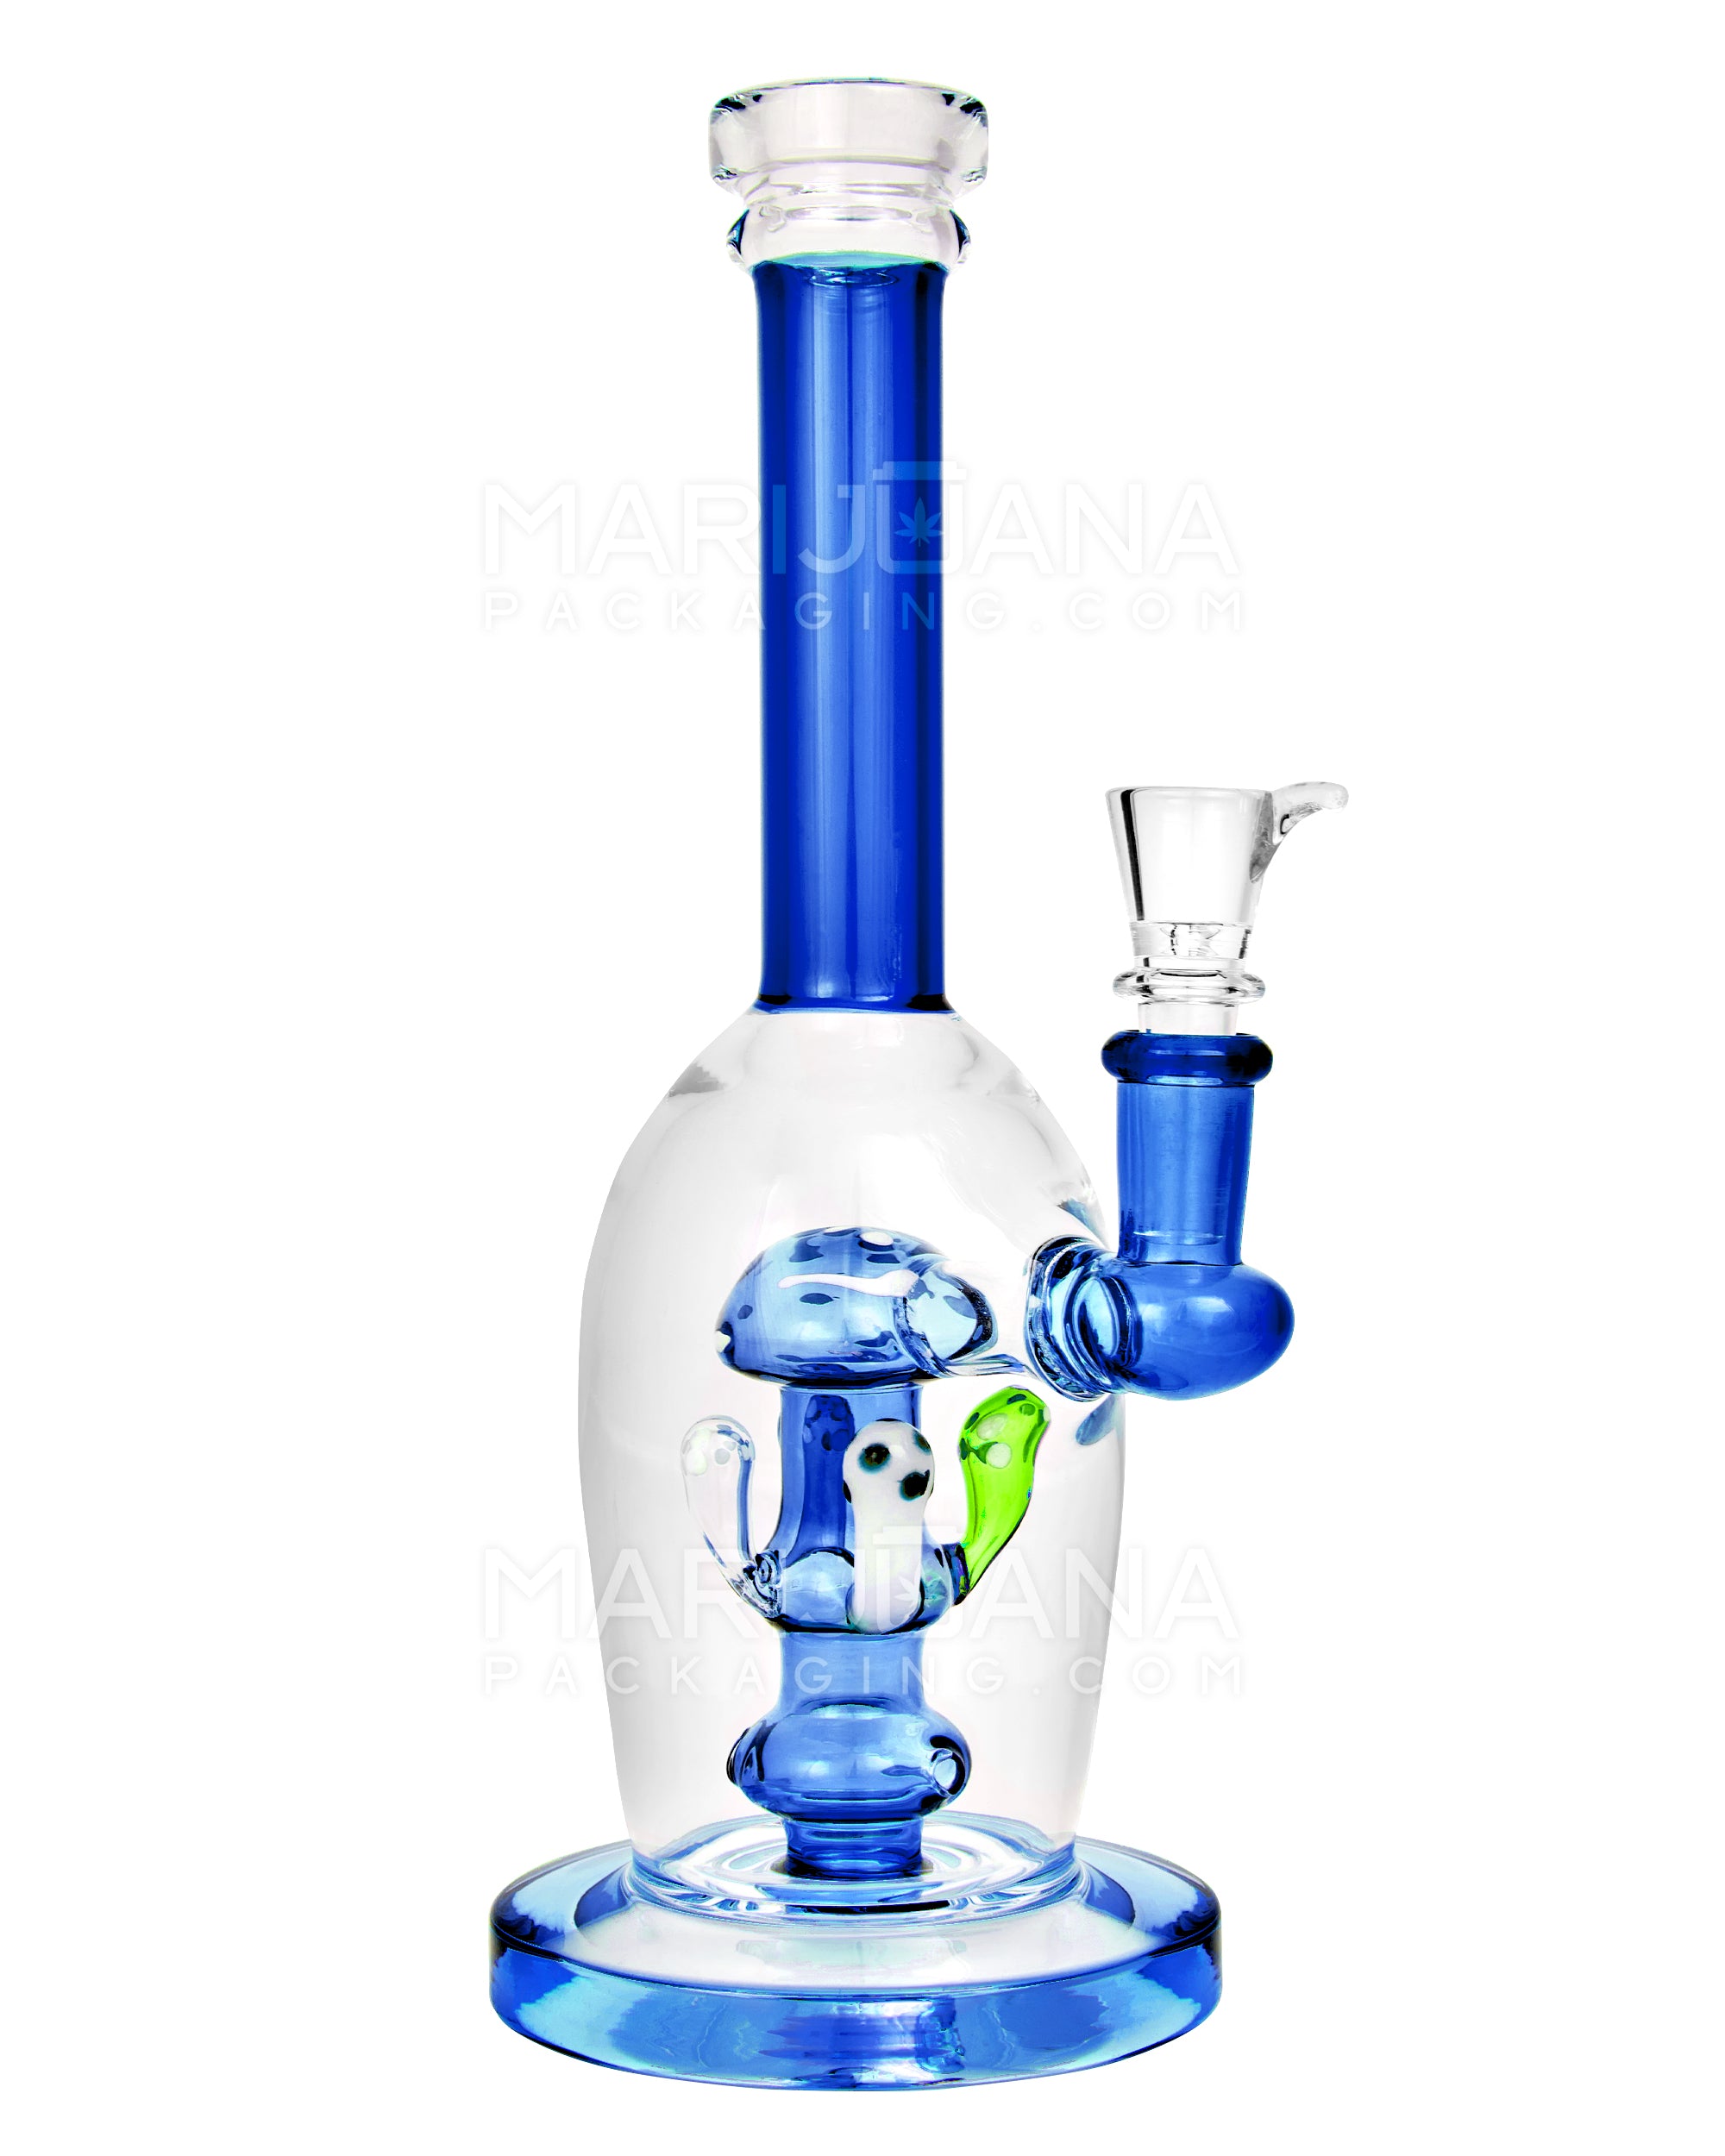 Straight Neck Mushroom Perc Glass Egg Water Pipe w/ Thick Base | 10.5in Tall - 14mm Bowl - Blue - 1